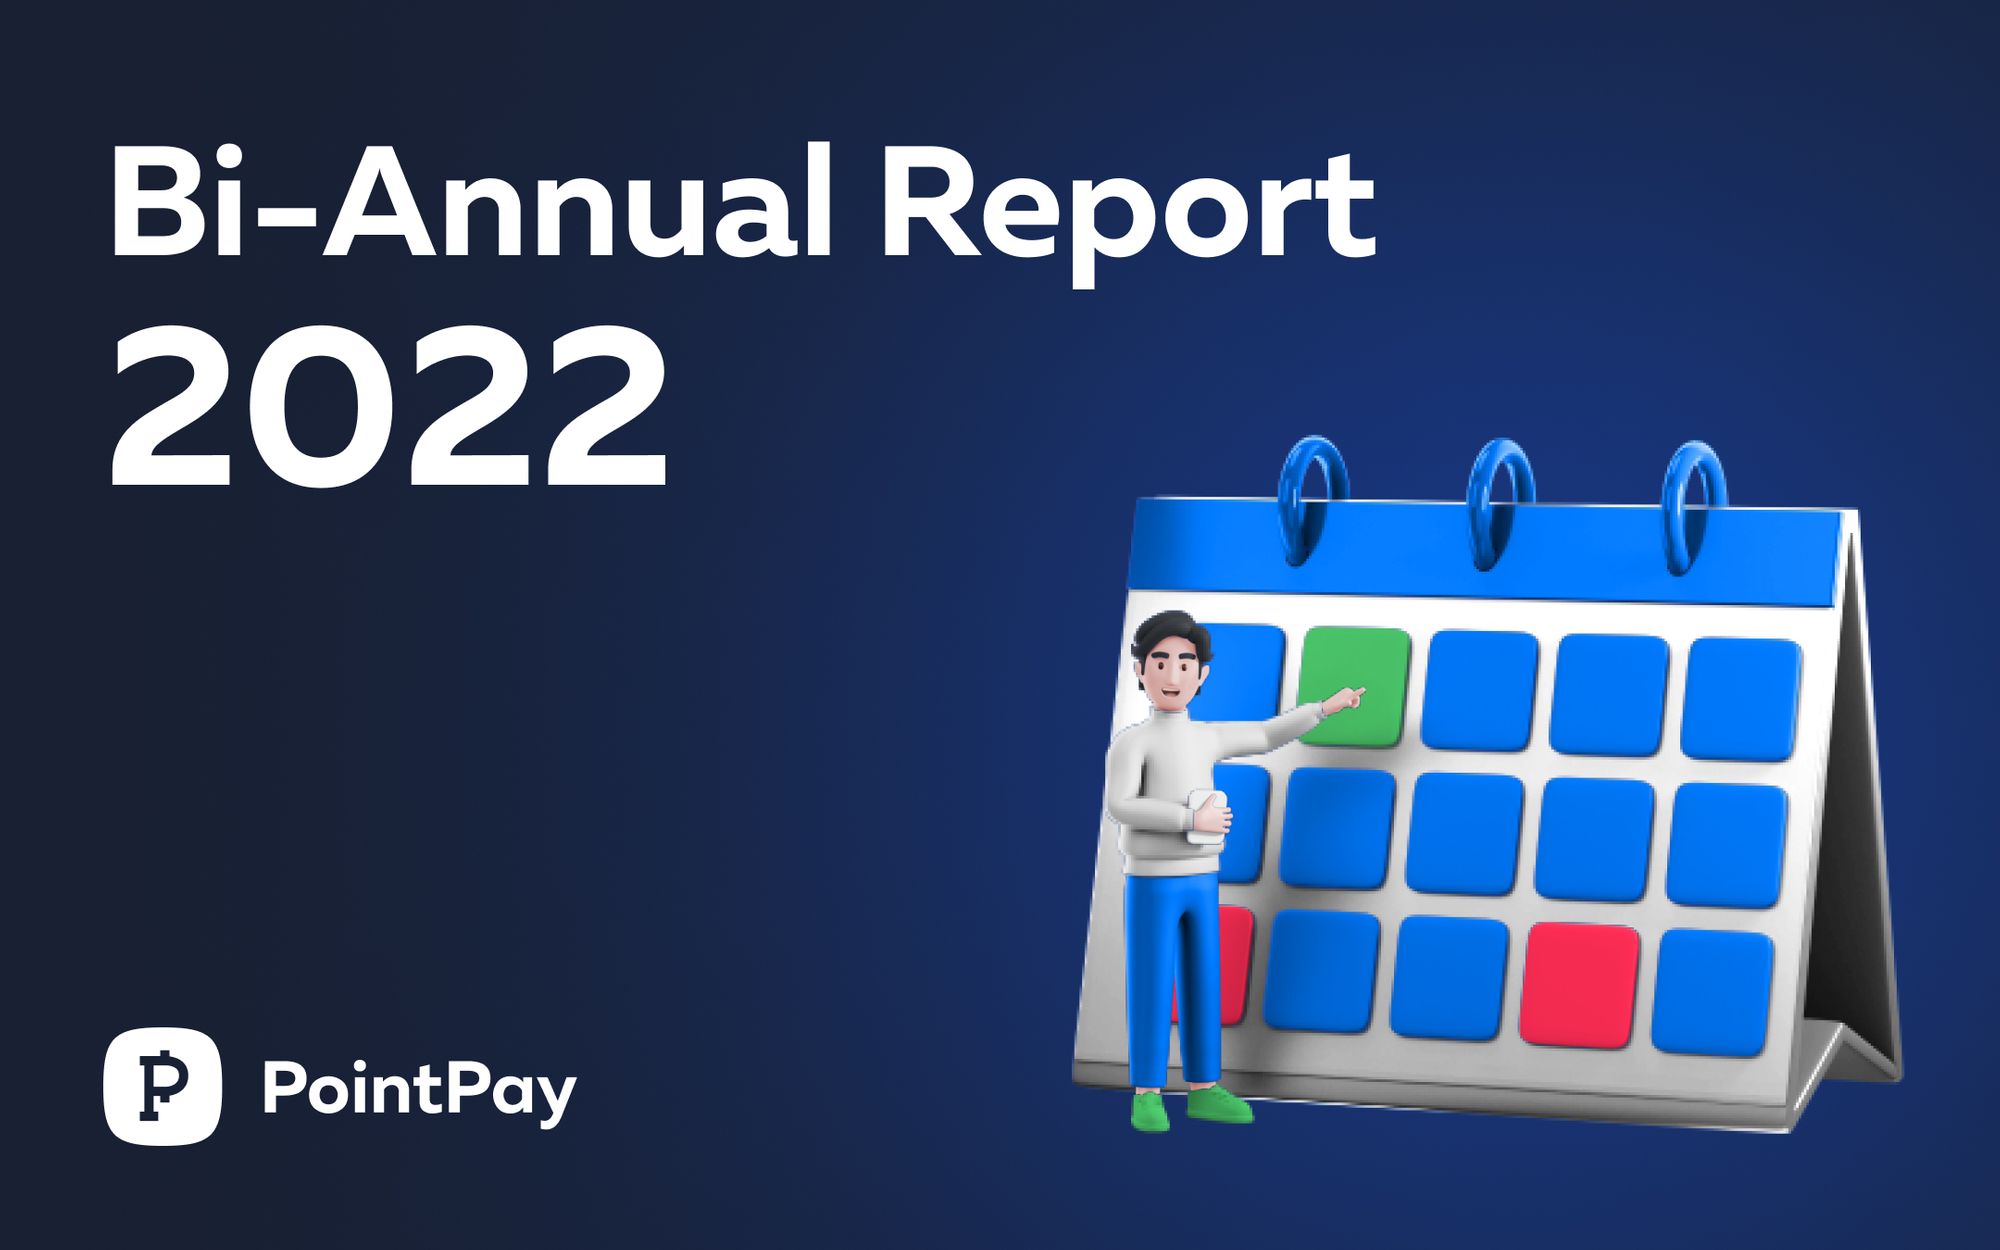 Bi-Annual PointPay Report released